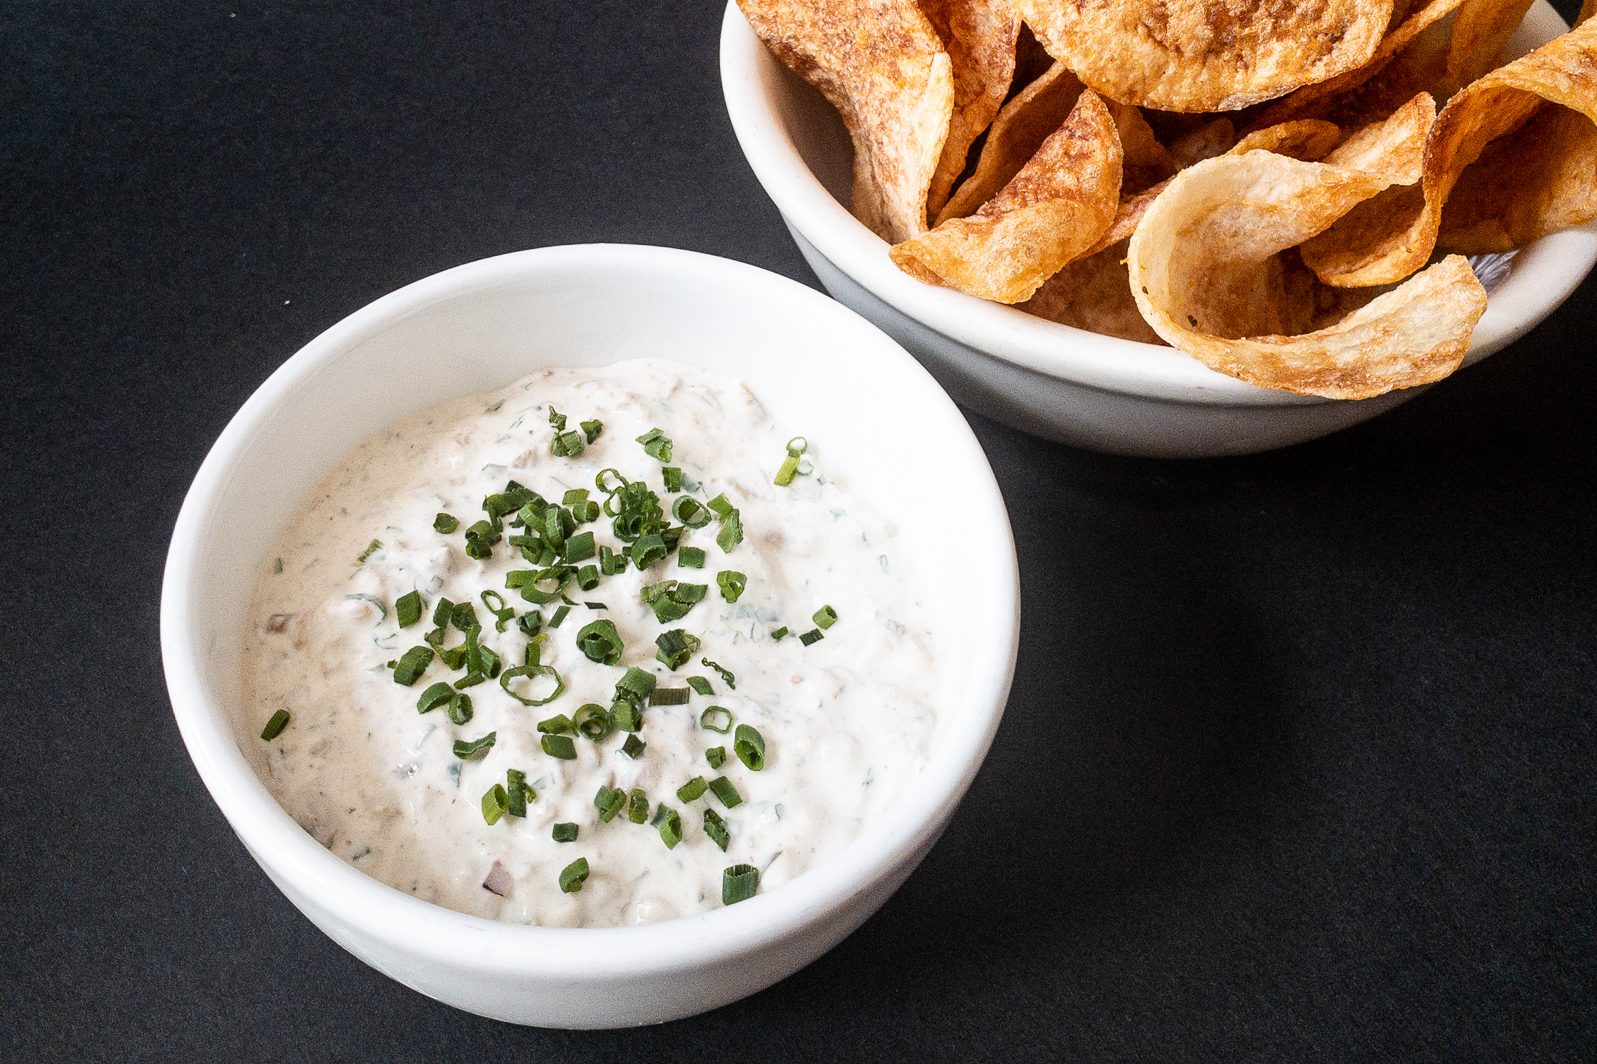 Chef Mike Price's clam dip will make your chips taste exponentially better.